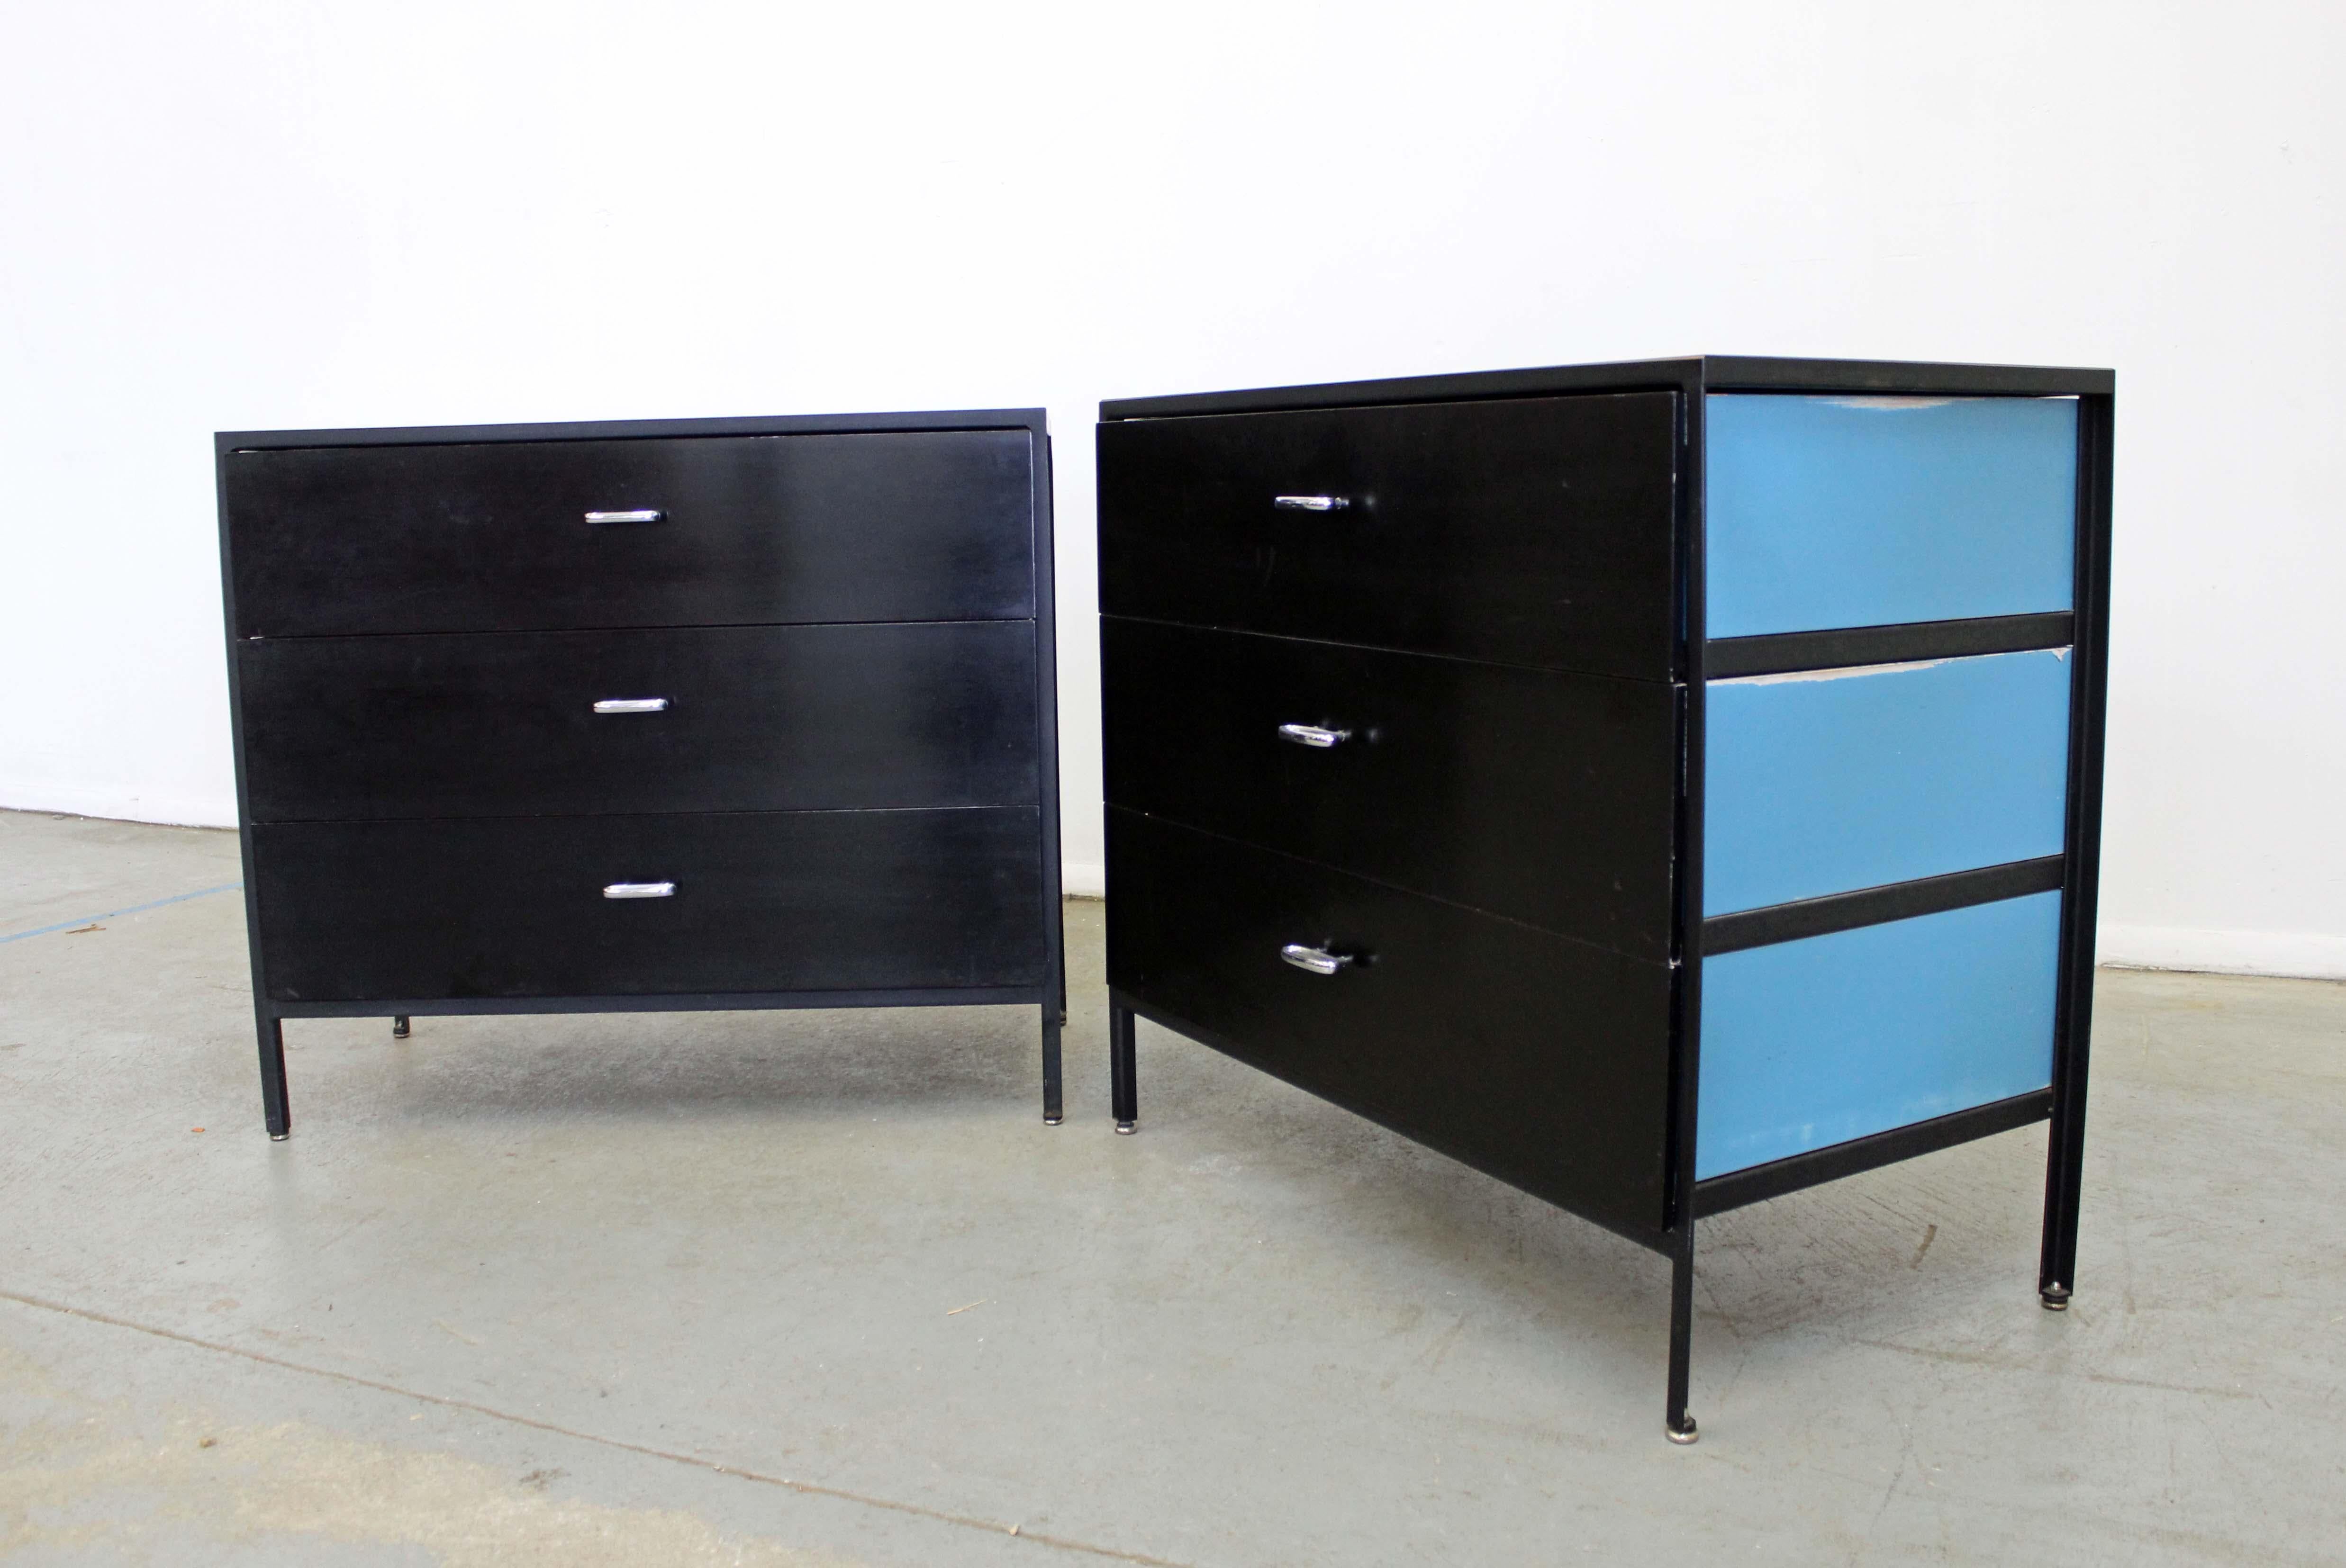 These dressers were designed by George Nelson for Herman Miller. They each have three drawers with chrome pulls, steel bases, and laminate tops.